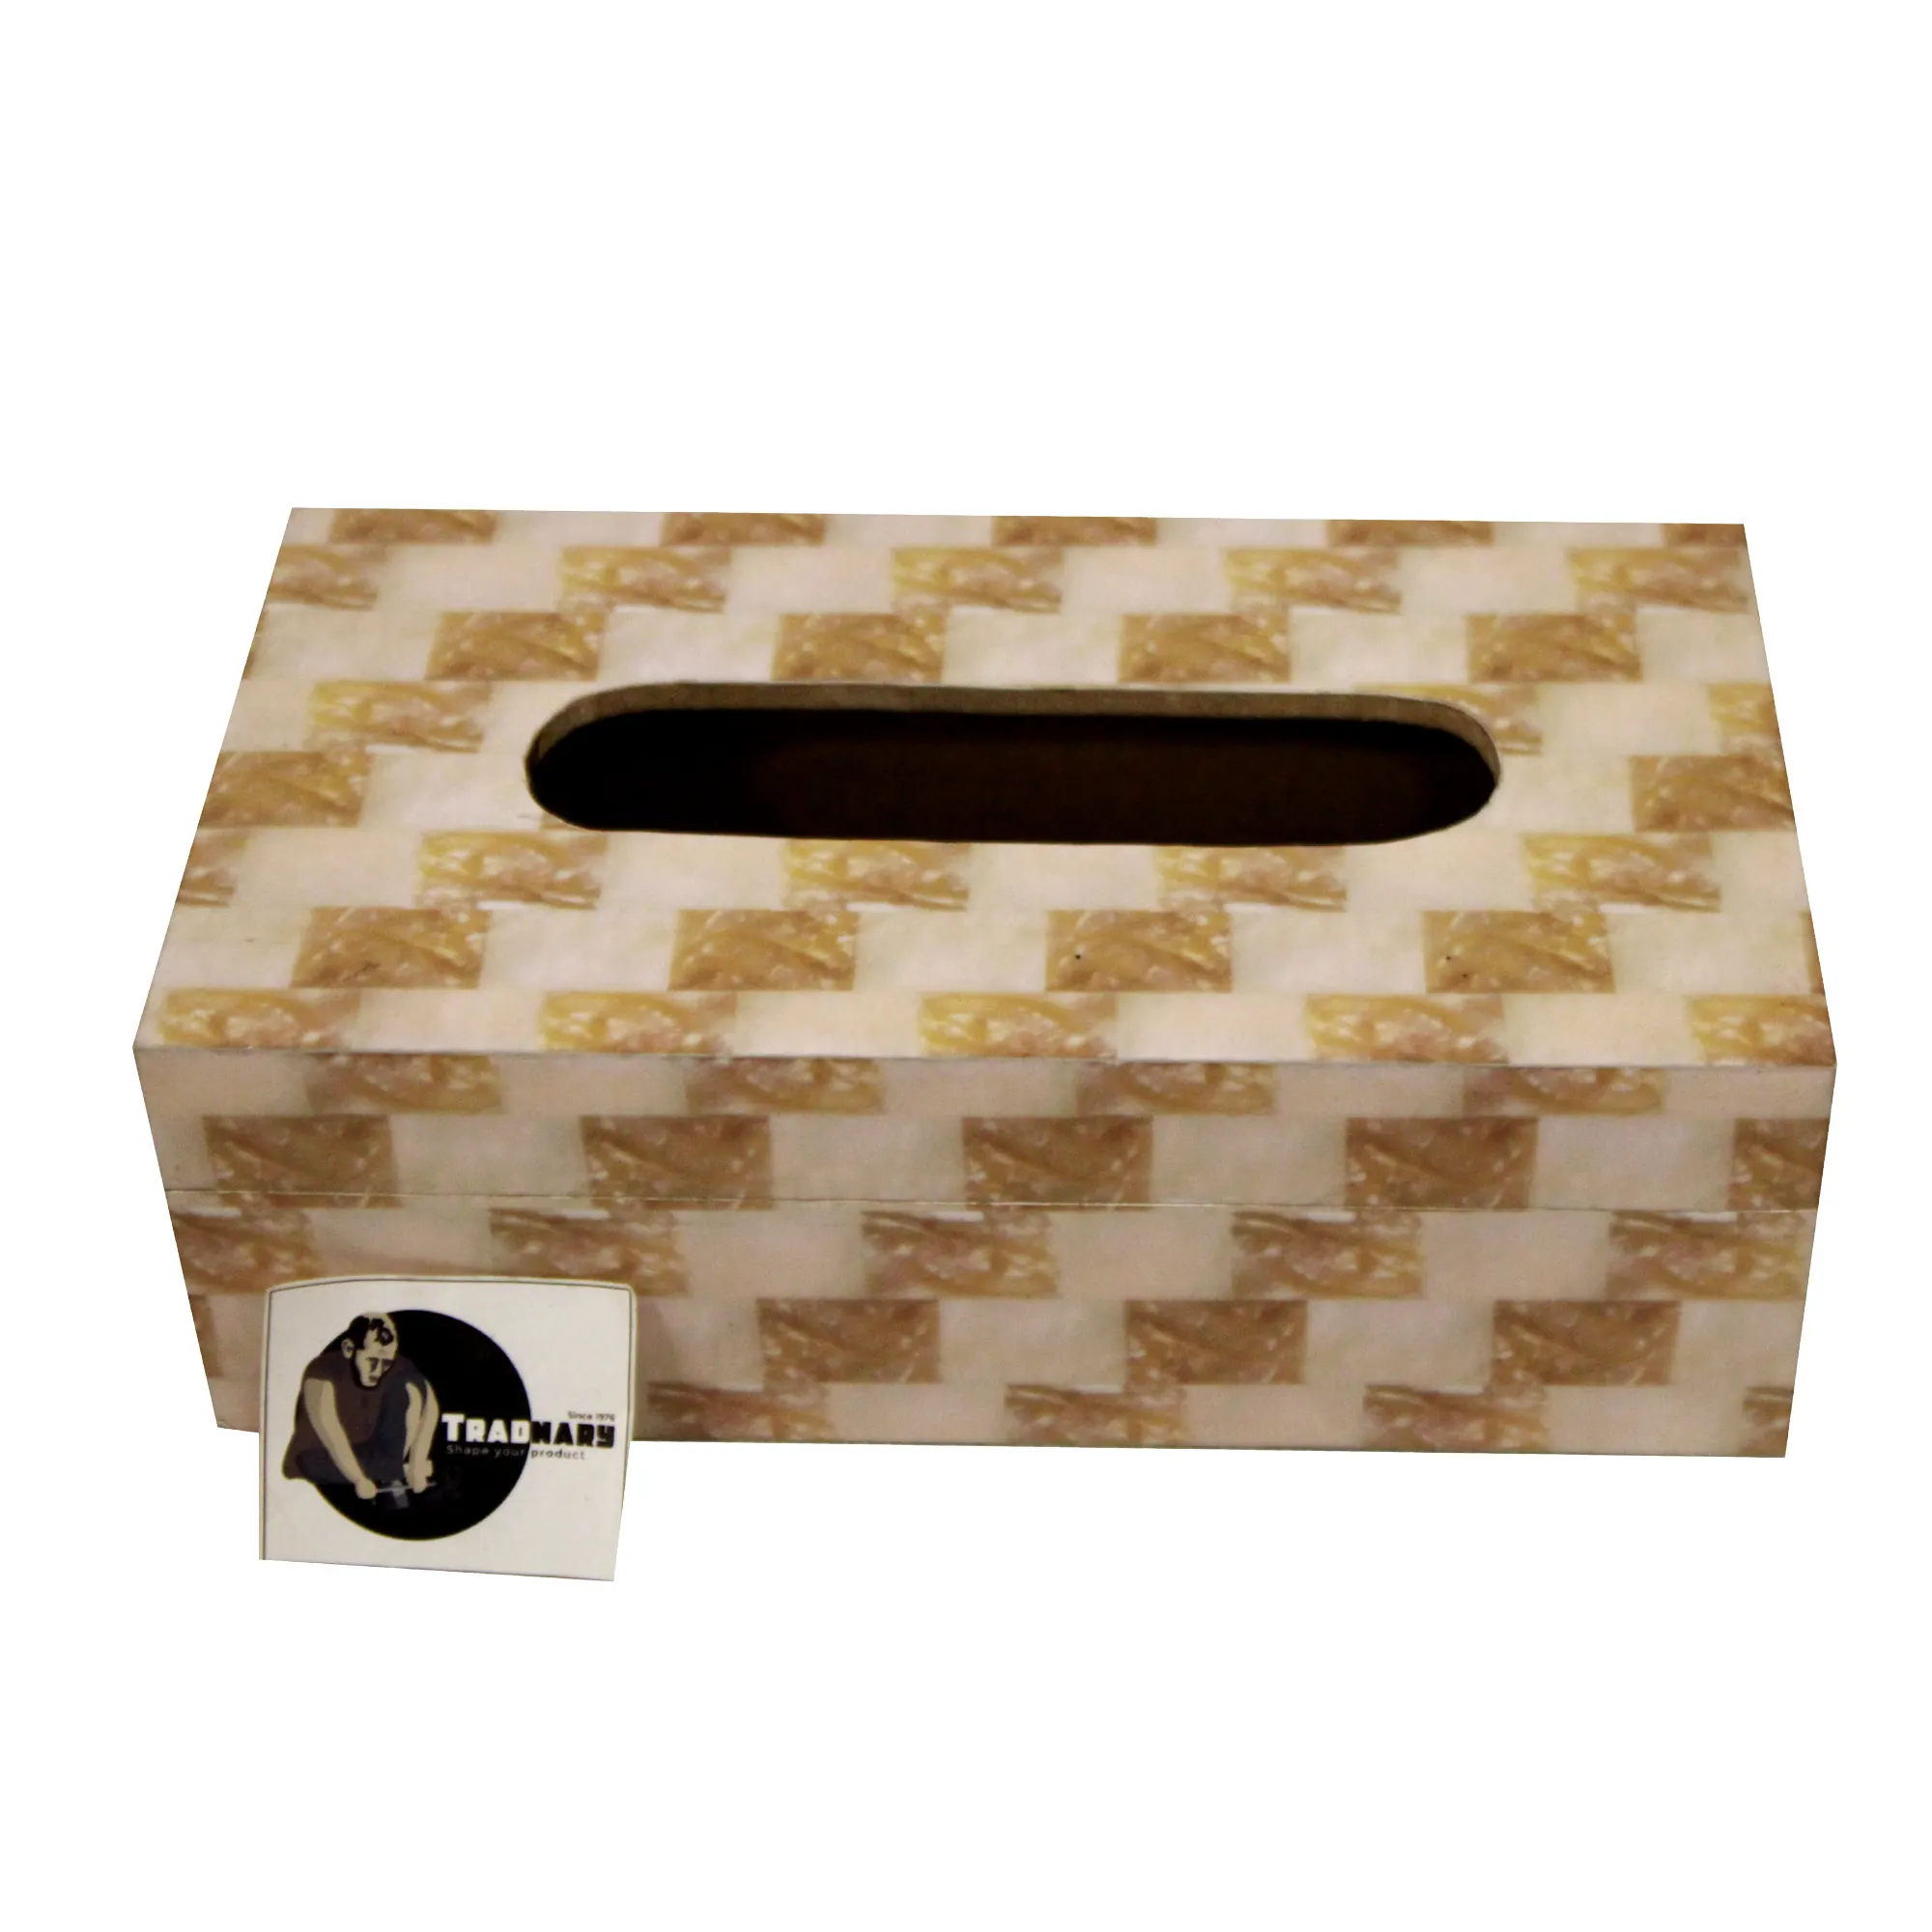 Custom Printed Tissue Box In Tiles Design From Tradnary